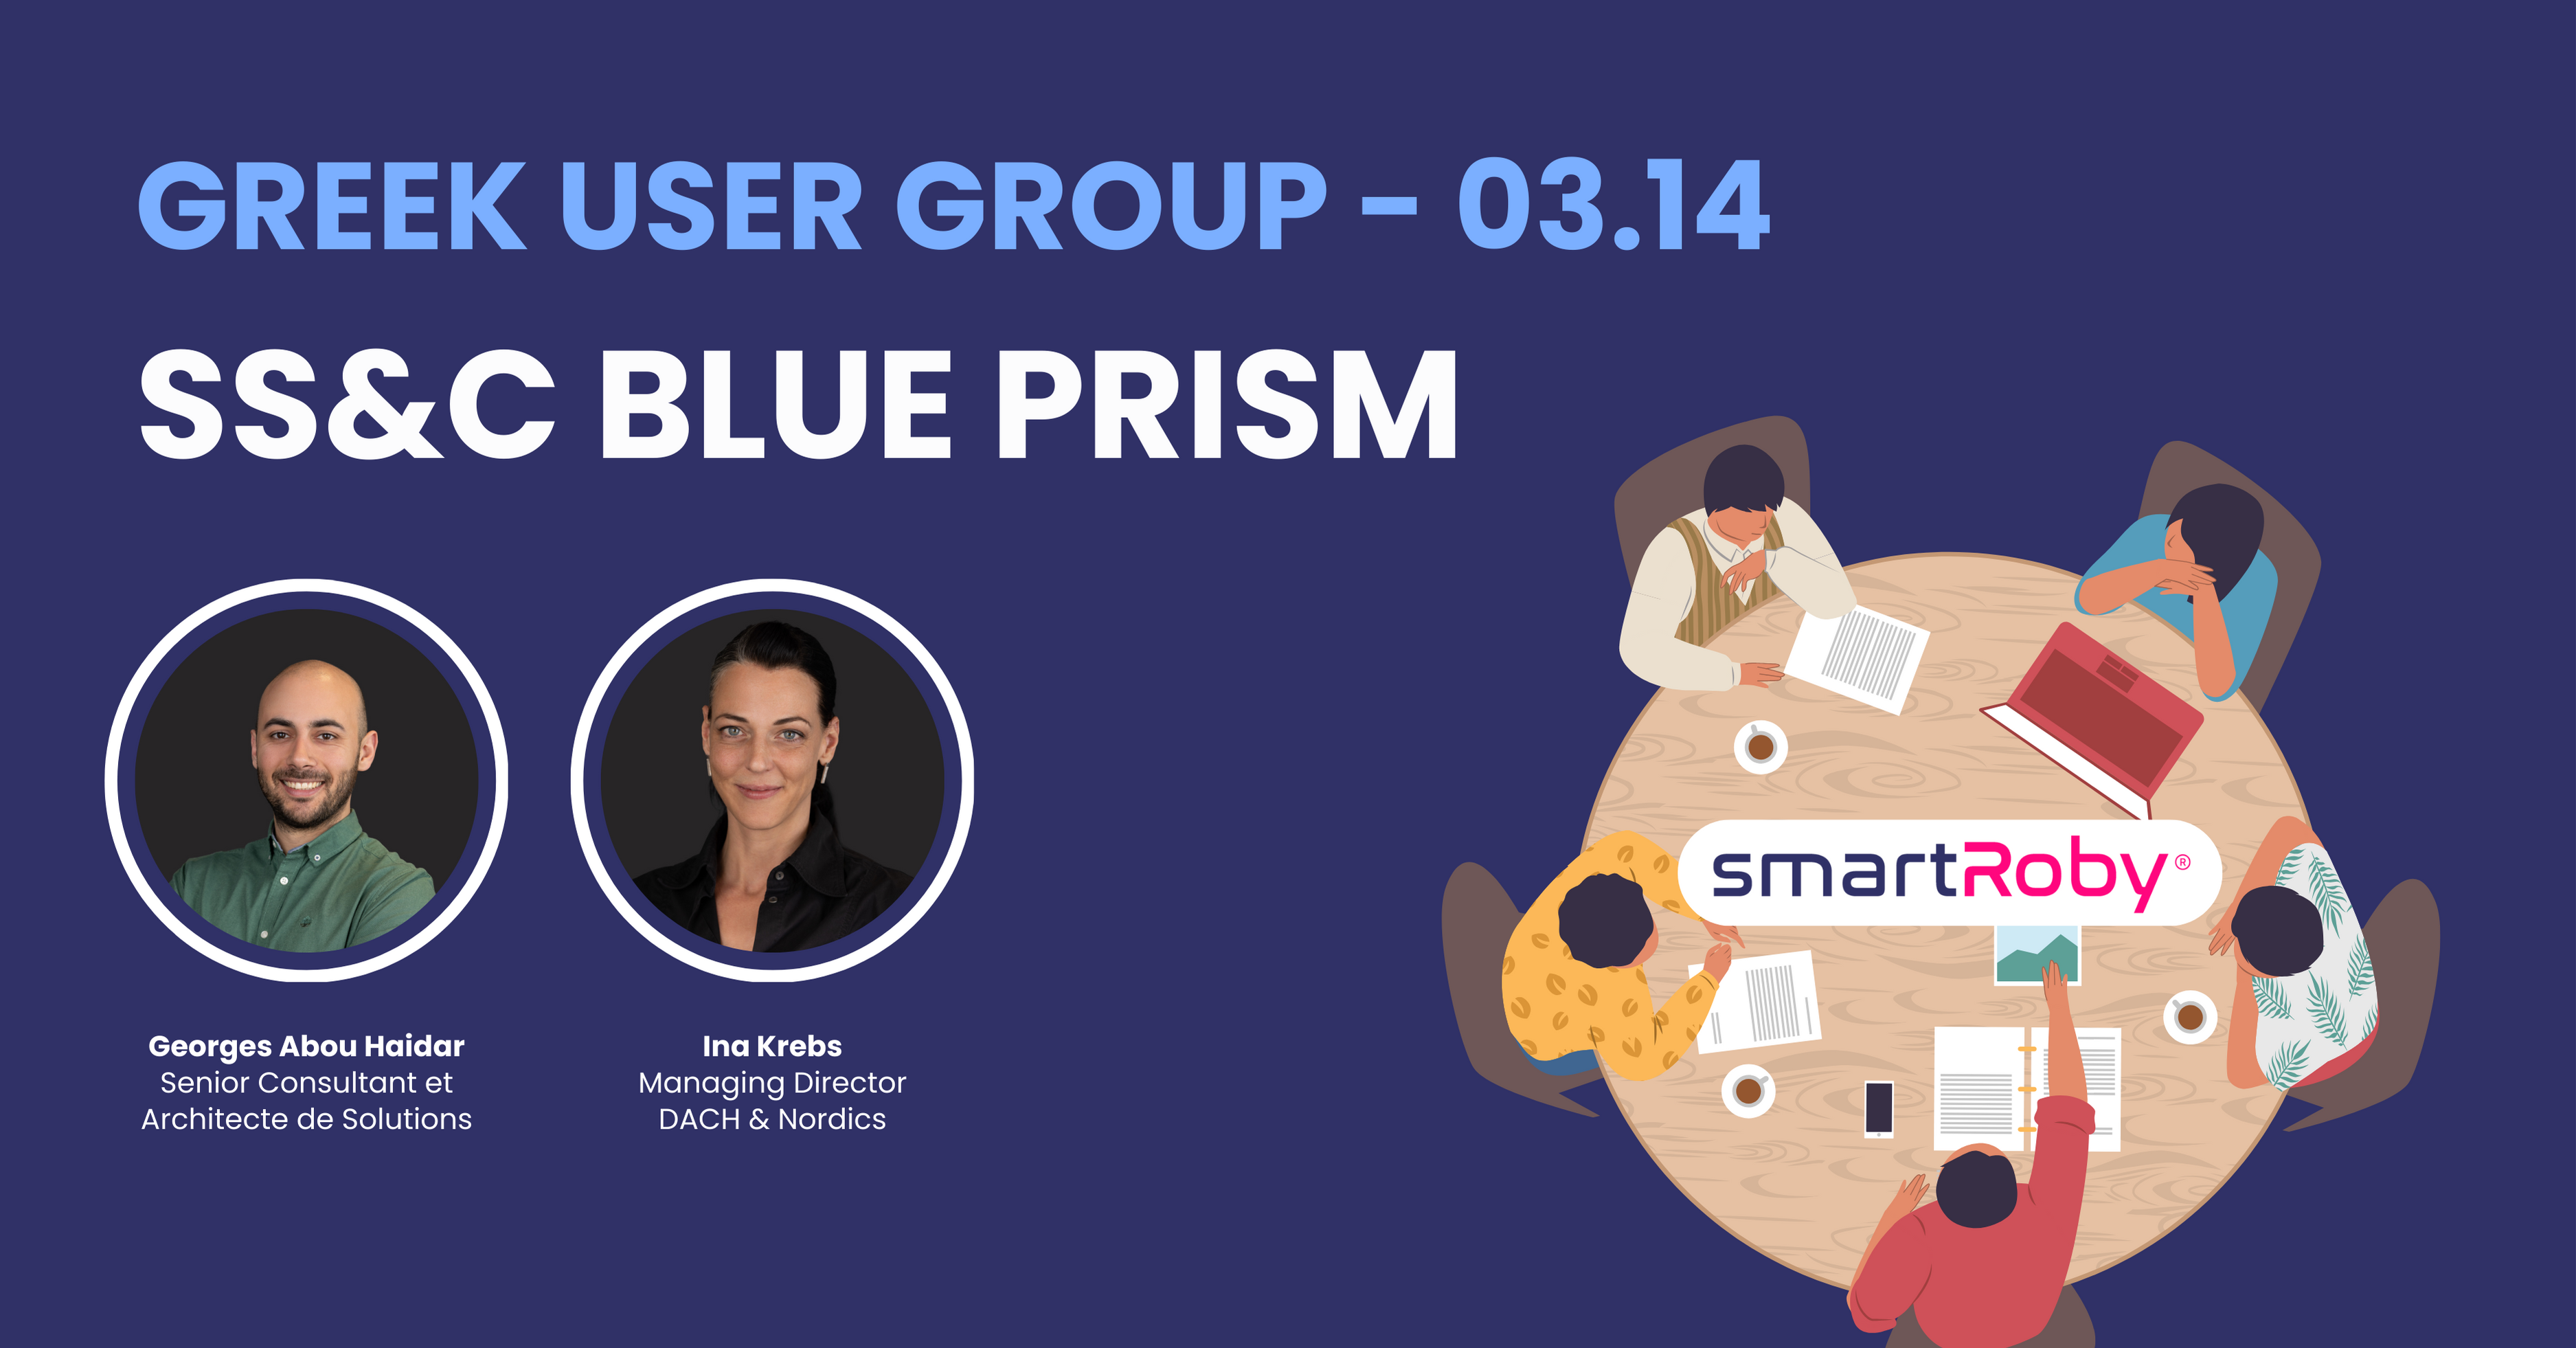 Novelis takes part in SS&C Blue Prism User Group event in Greece